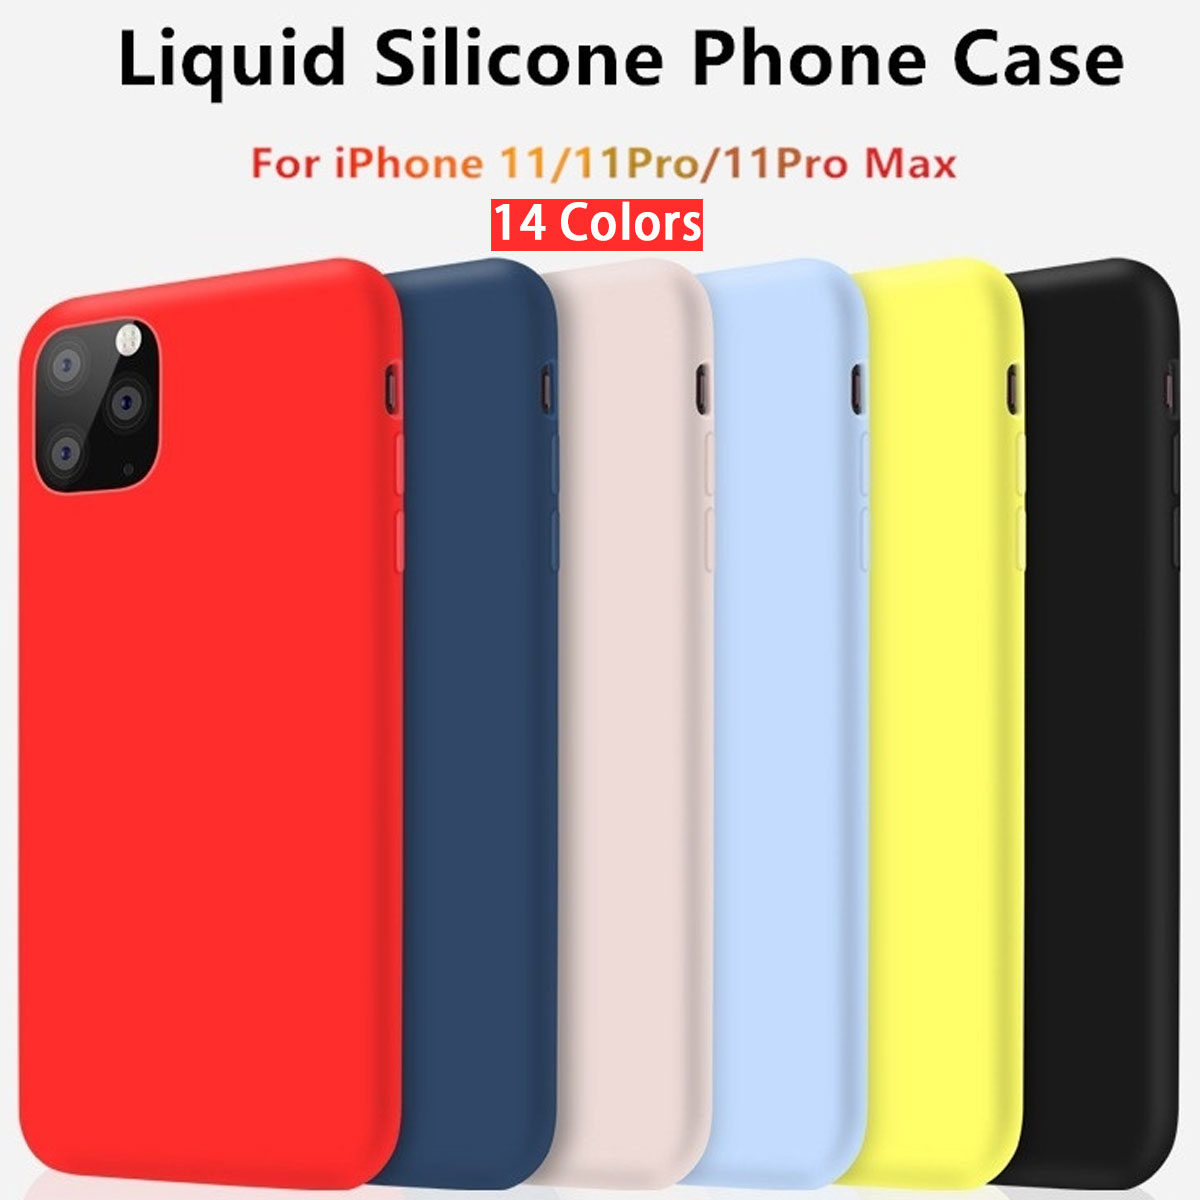 Bakeey-Smooth-Shockproof-Soft-Liquid-Silicone-Rubber-Back-Cover-Protective-Case-for-iPhone-11-Series-1588312-1